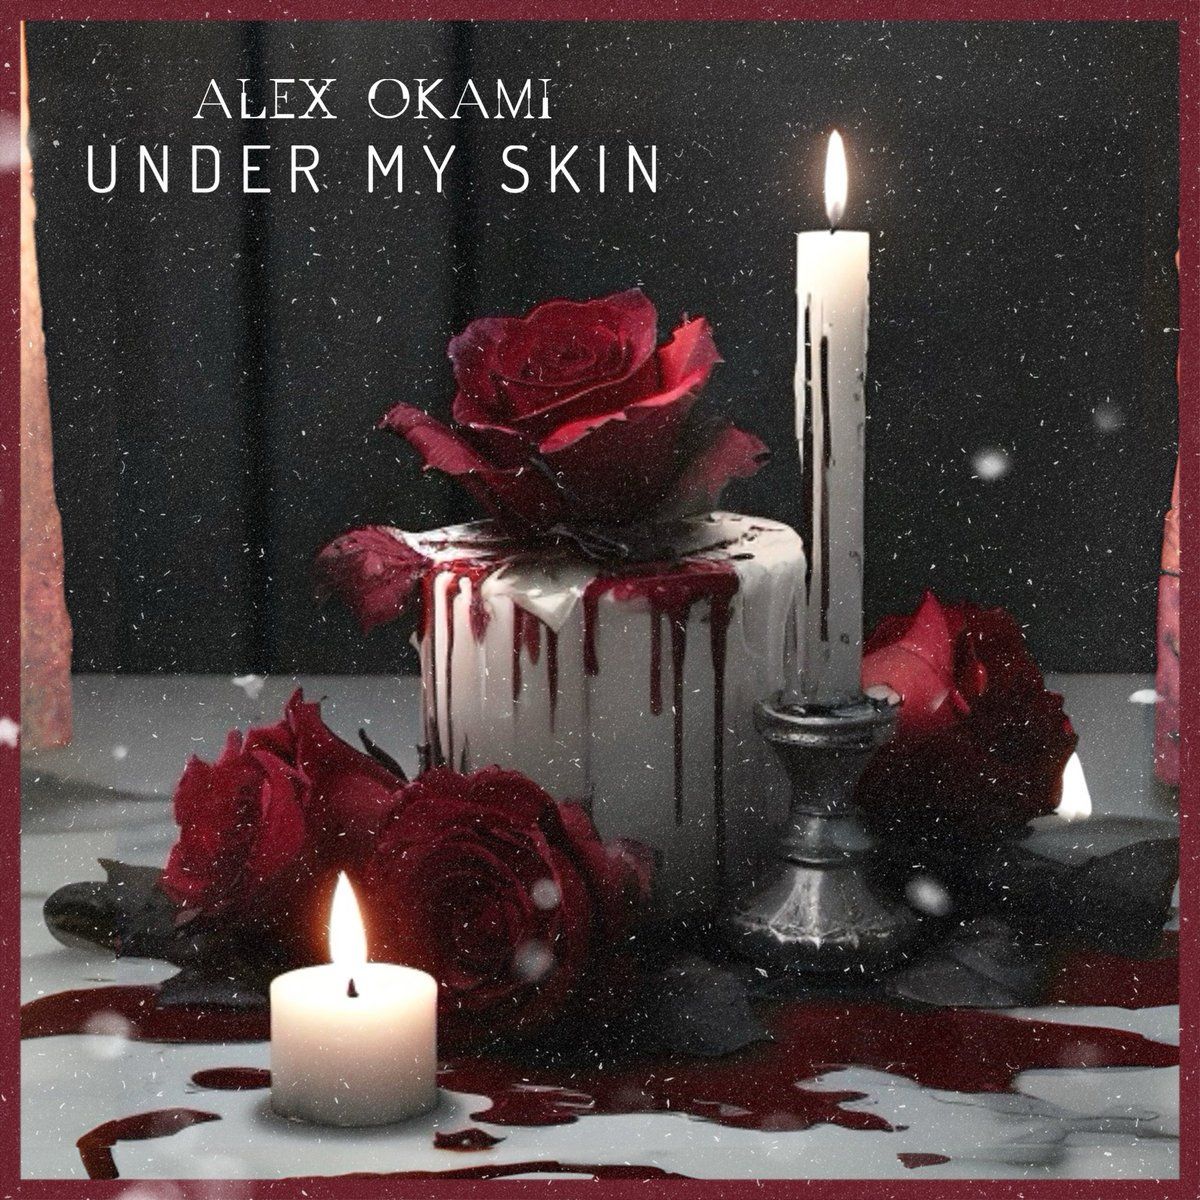 The Shadows Whisper — Alex Okami Escapes the Clutches of a Toxic Relationship in his Candle-lit Video for “Under My Skin”